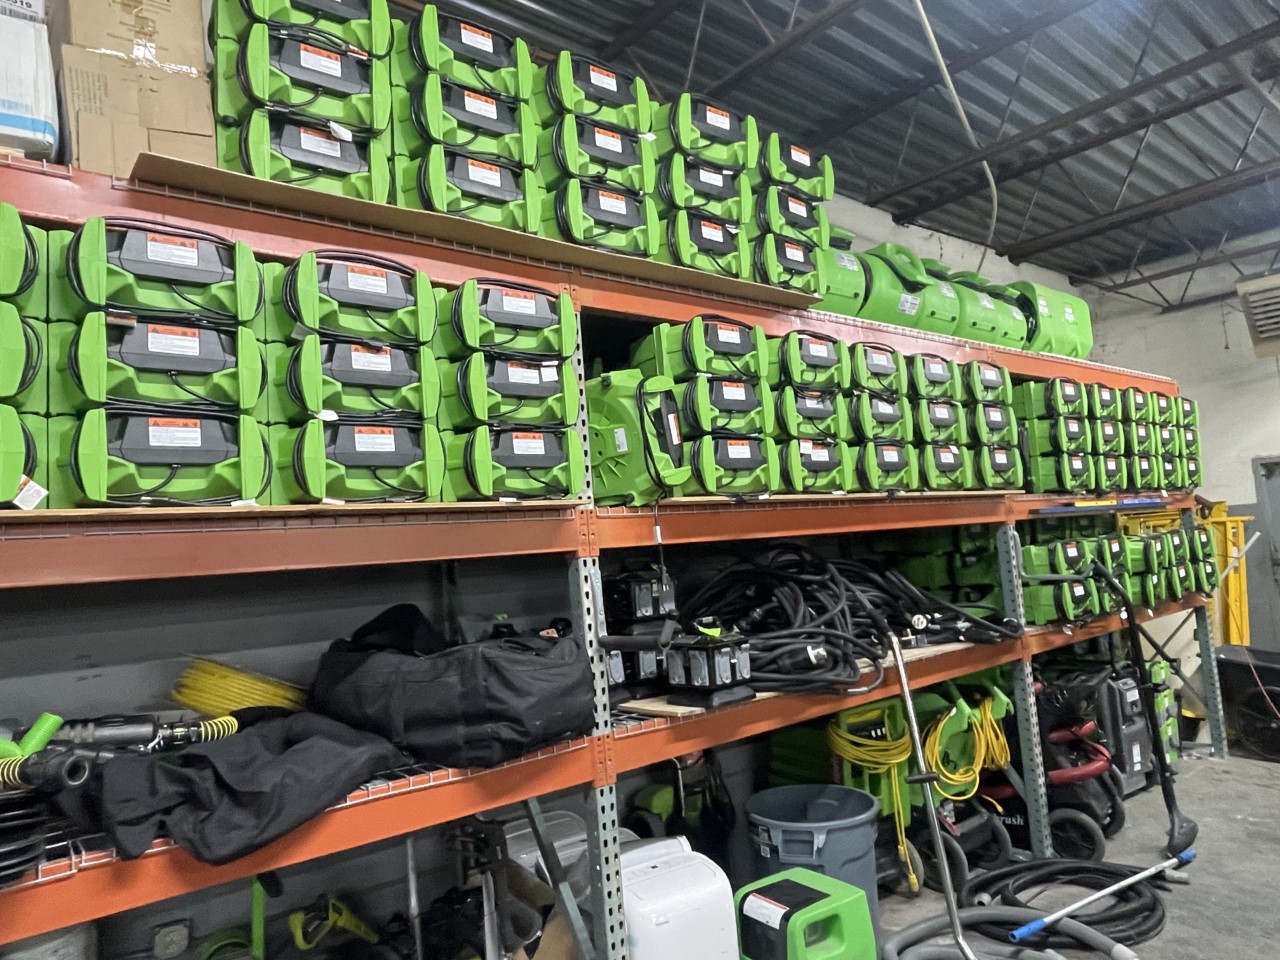 SERVPRO keeps a large inventory of equipment to be able to handle disasters of any size. Ranging from water mitigation, fire restoration, mold remediation, COVID cleaning and reconstruction services.